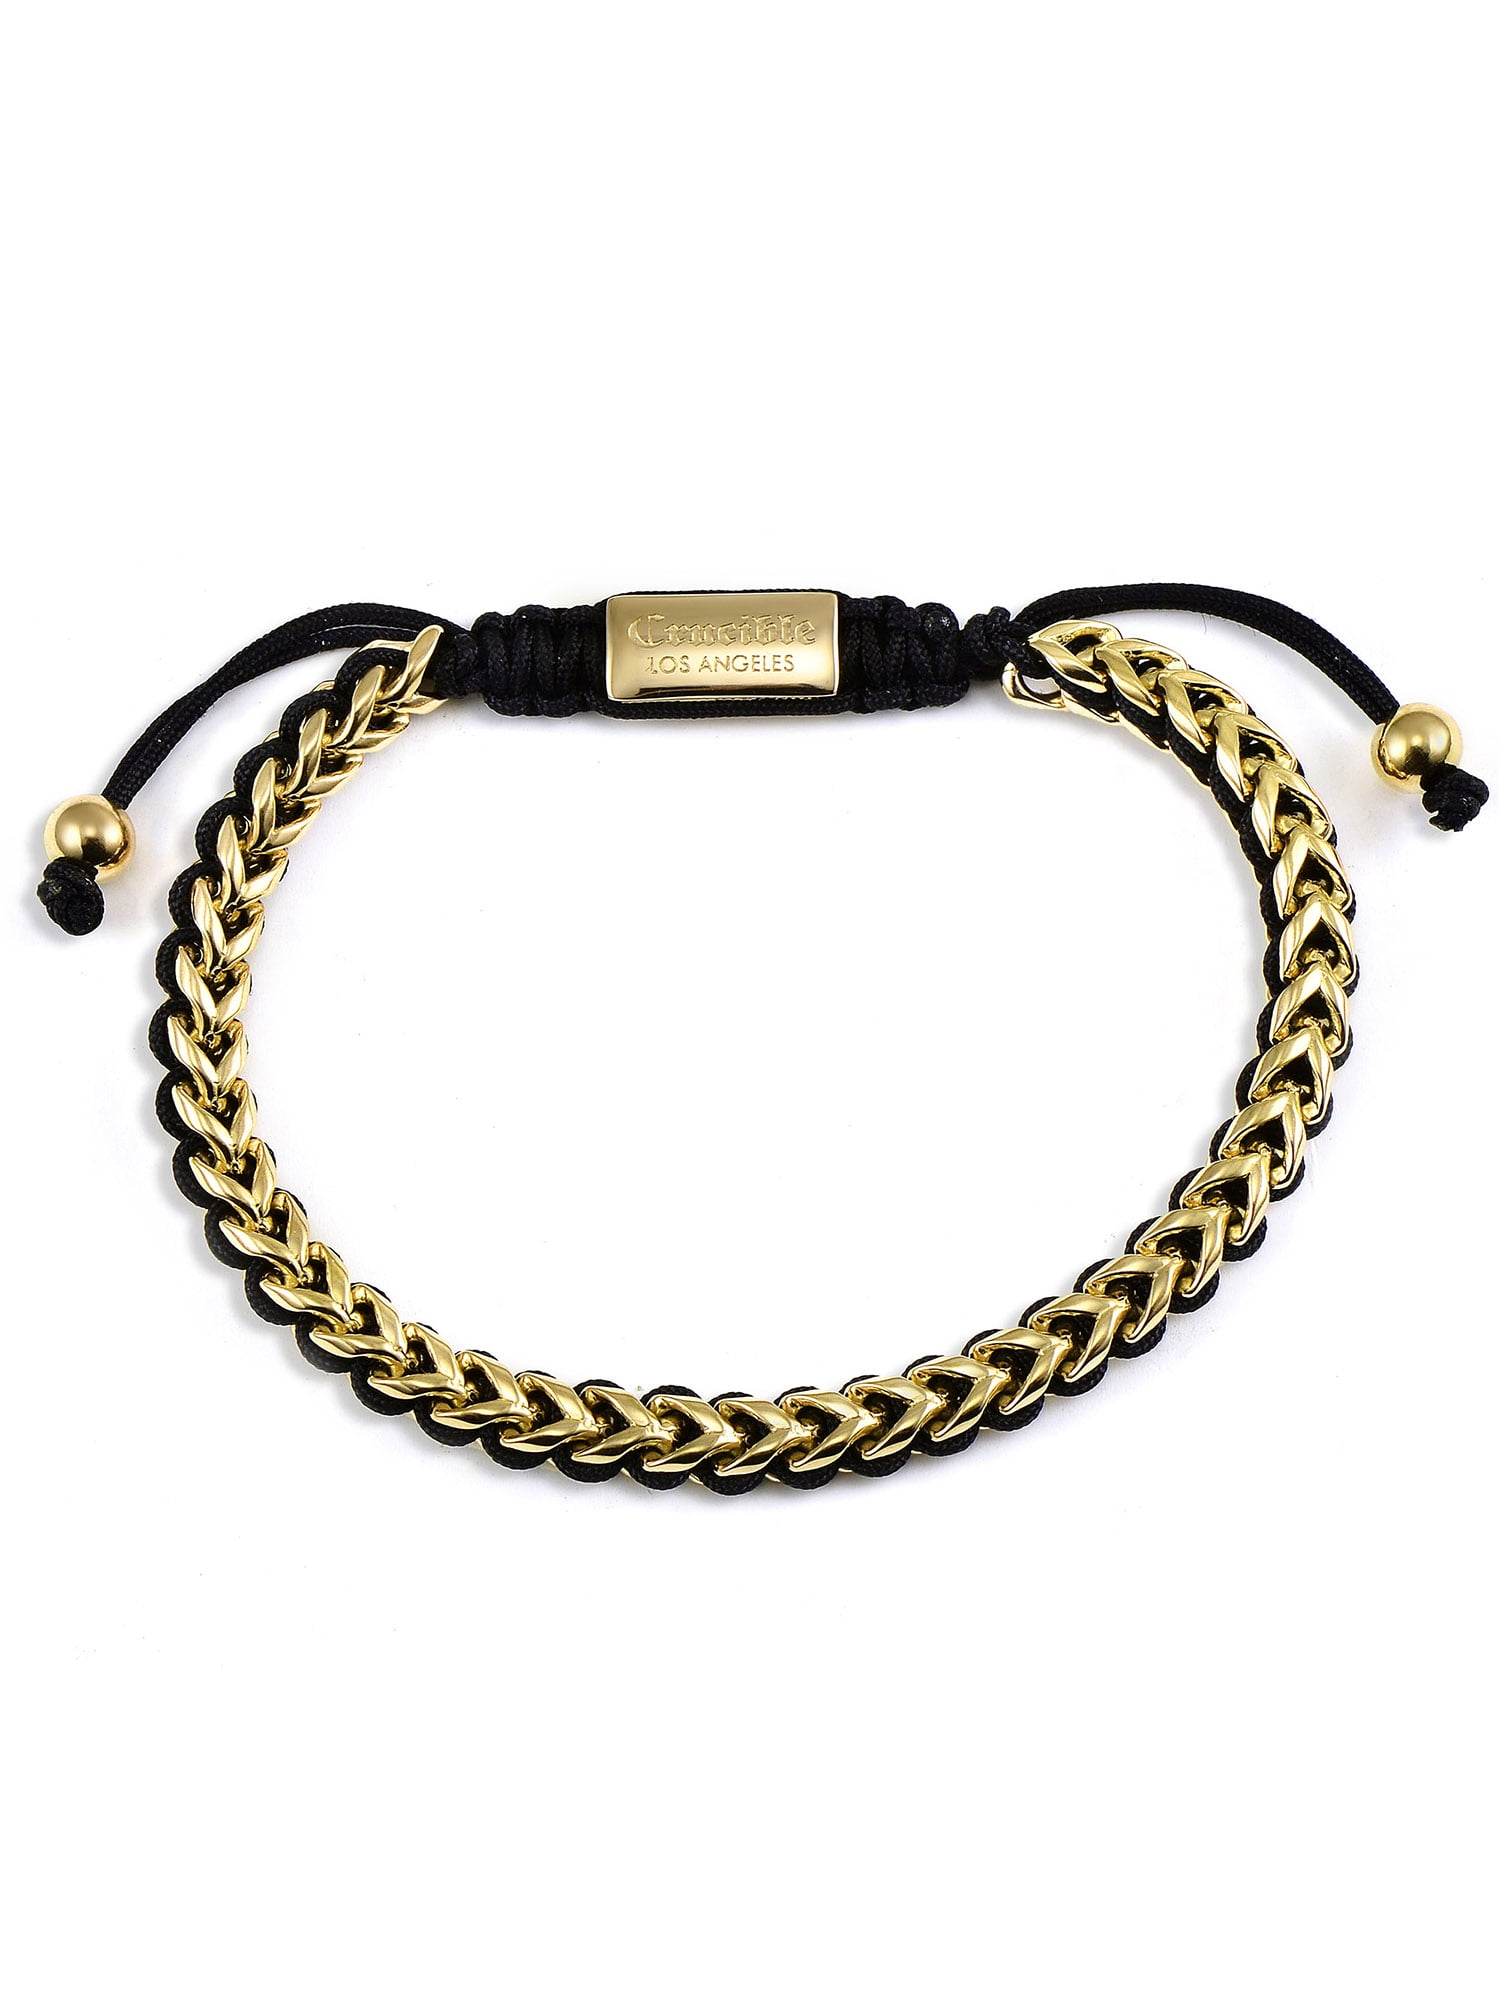 Stainless Steel 6mm Franco Chain Bracelet with Woven Black Cord On Shocker Tie - Rose Gold